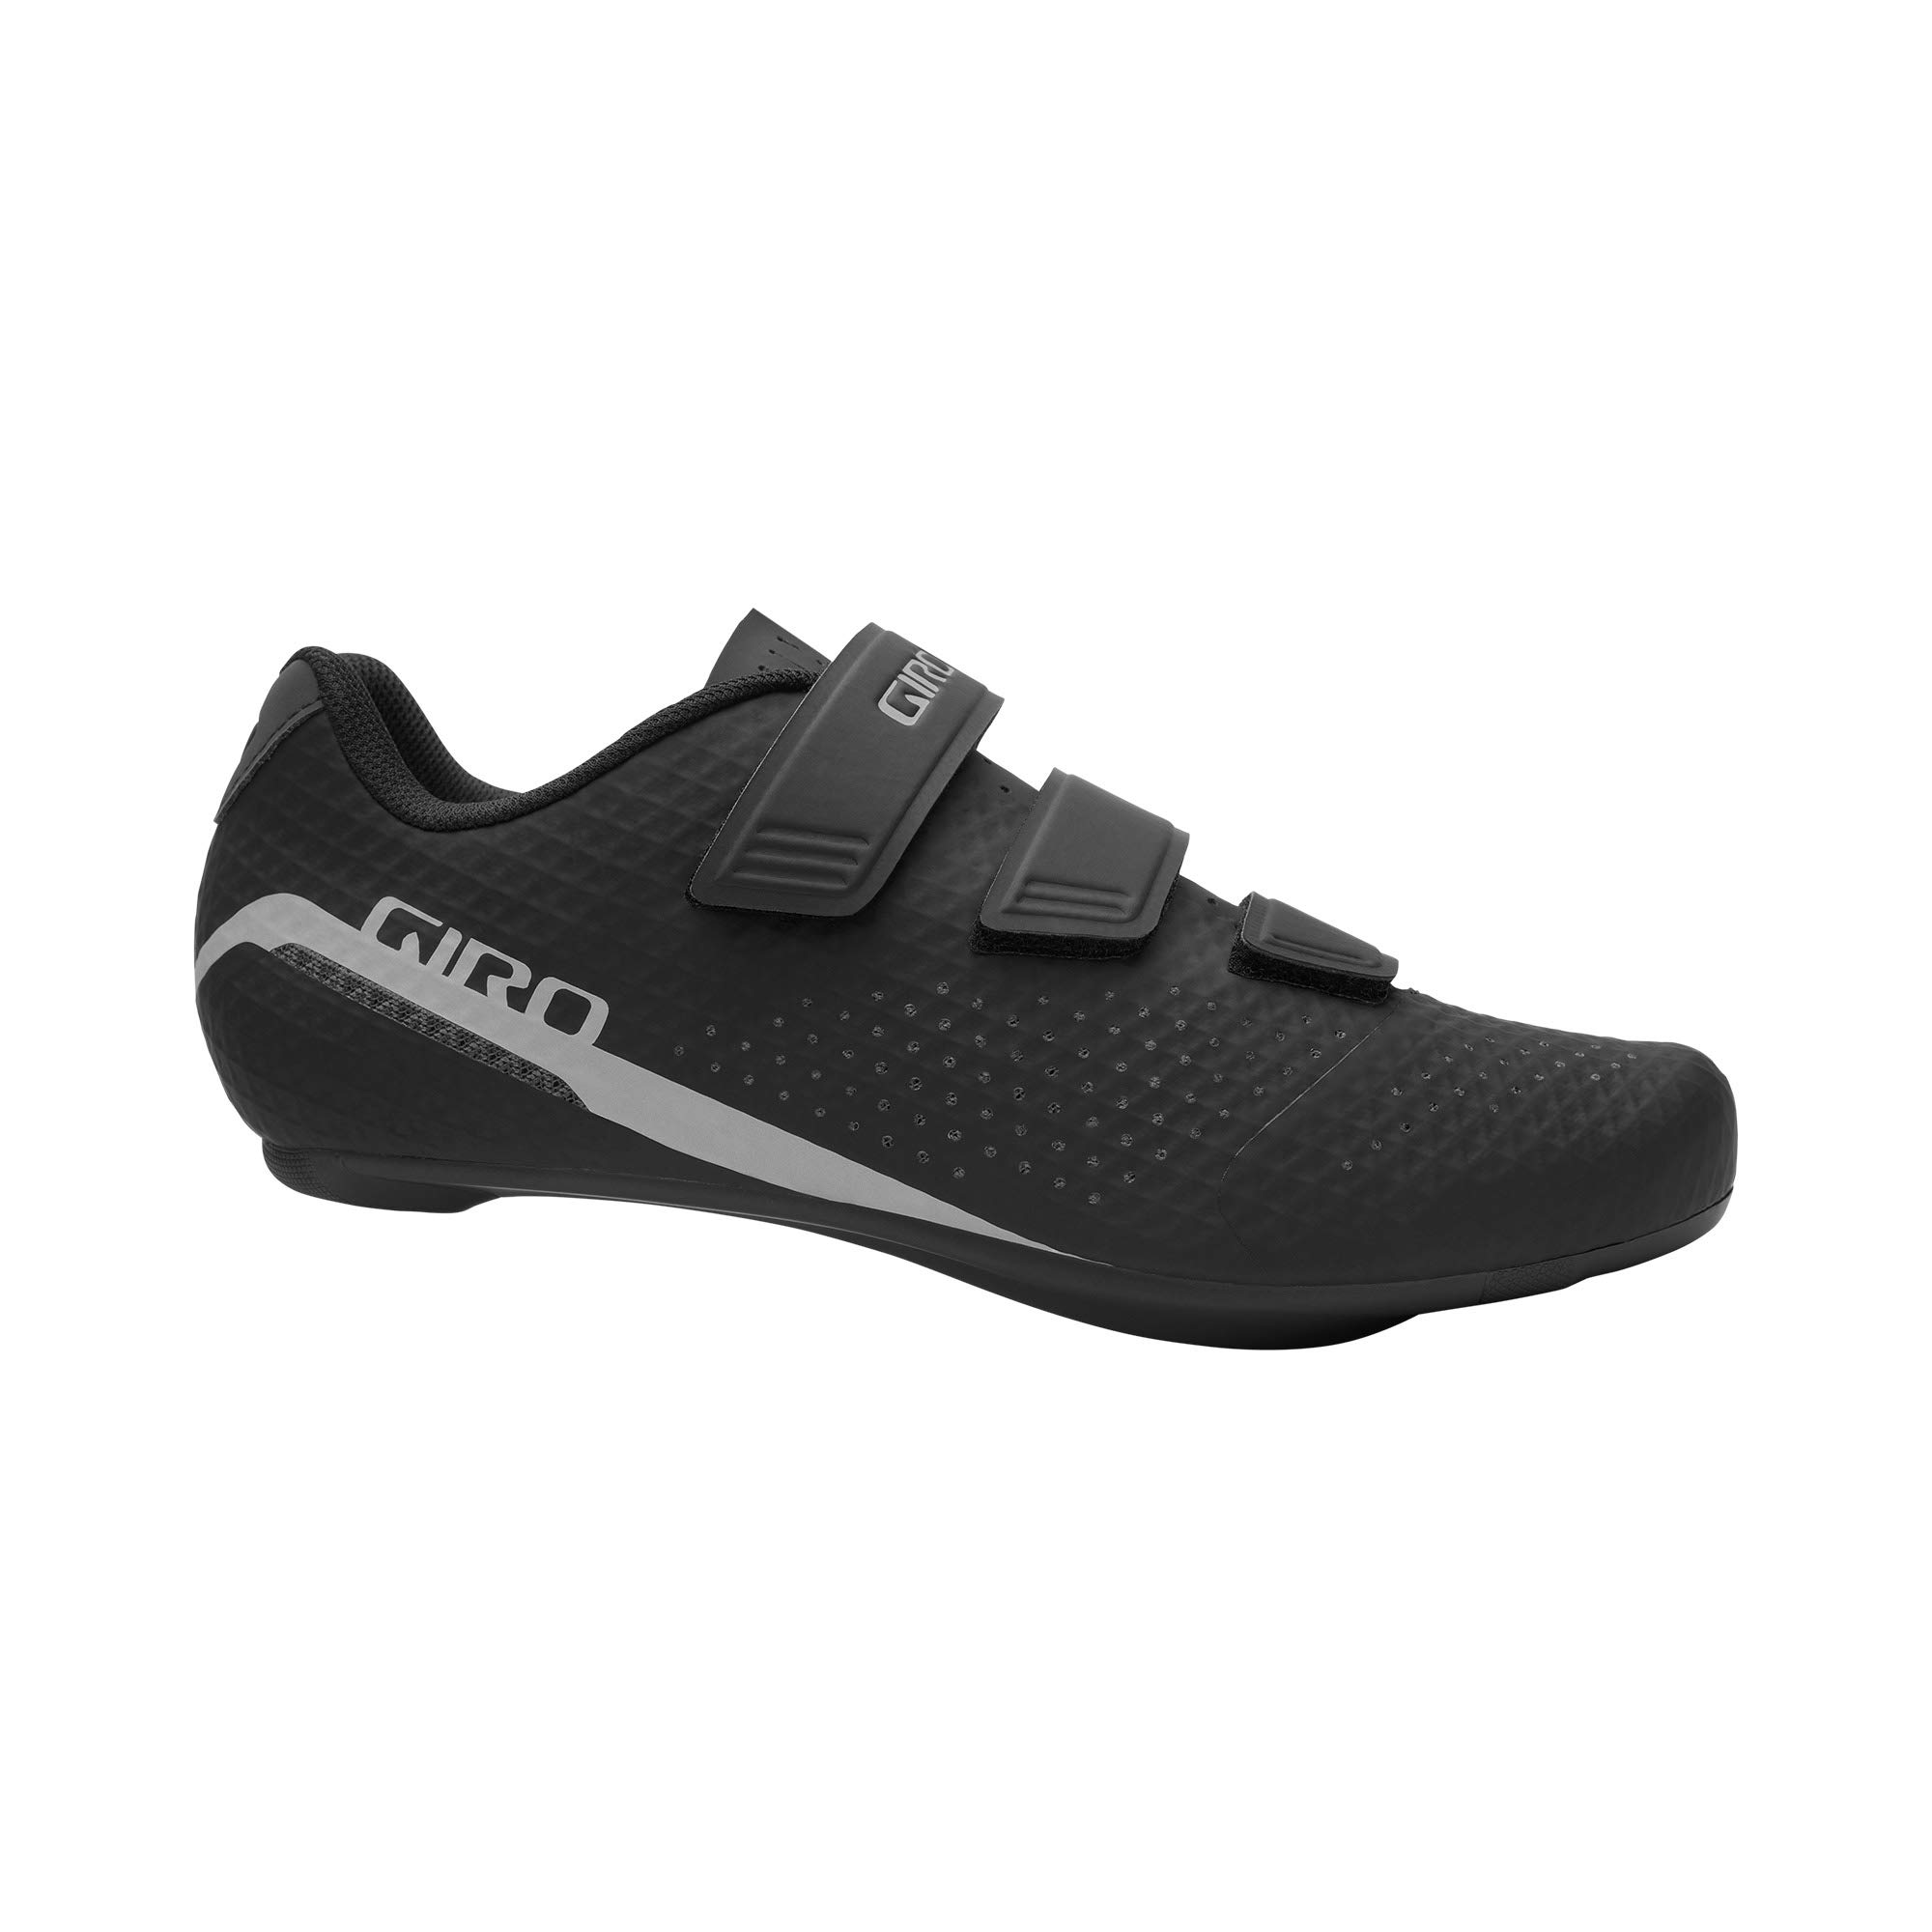 Giro Stylus Men's Indoors and Outdoors Clipless Road Cycling Shoes - No Frills, Just The Fundamentals Done Right